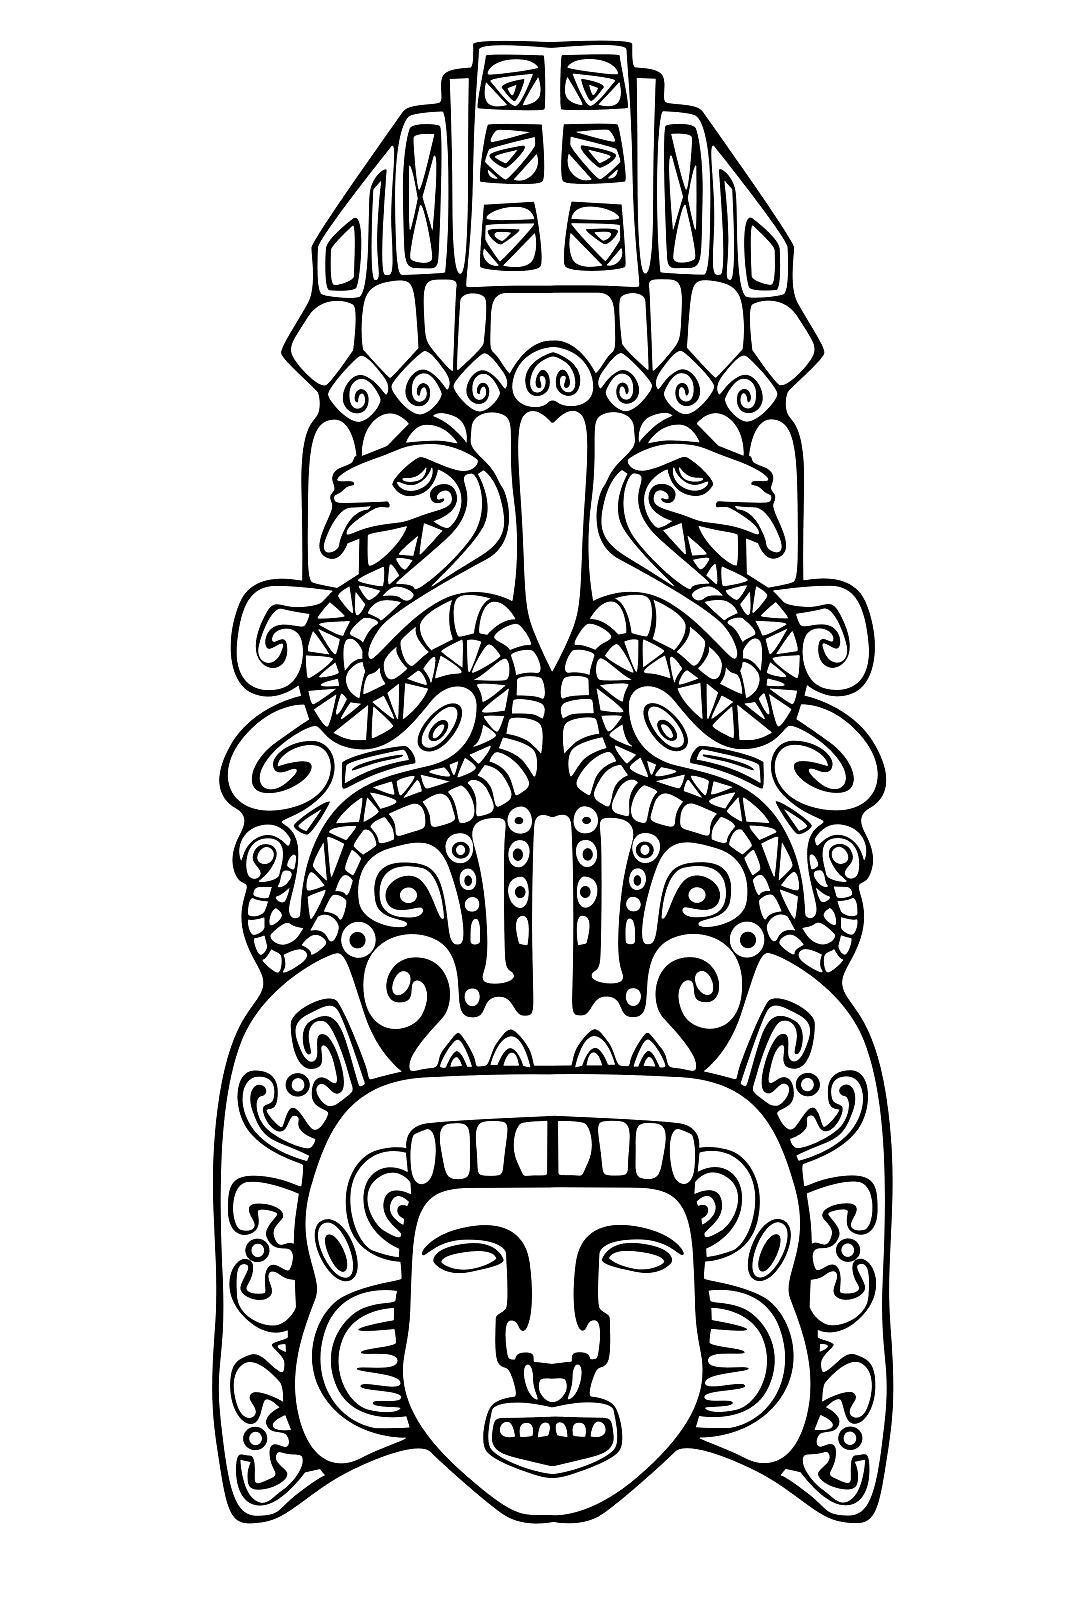 Totem inspired by Aztecs, Mayans and Incas - 2, Artist : Rocich   Source : 123rf